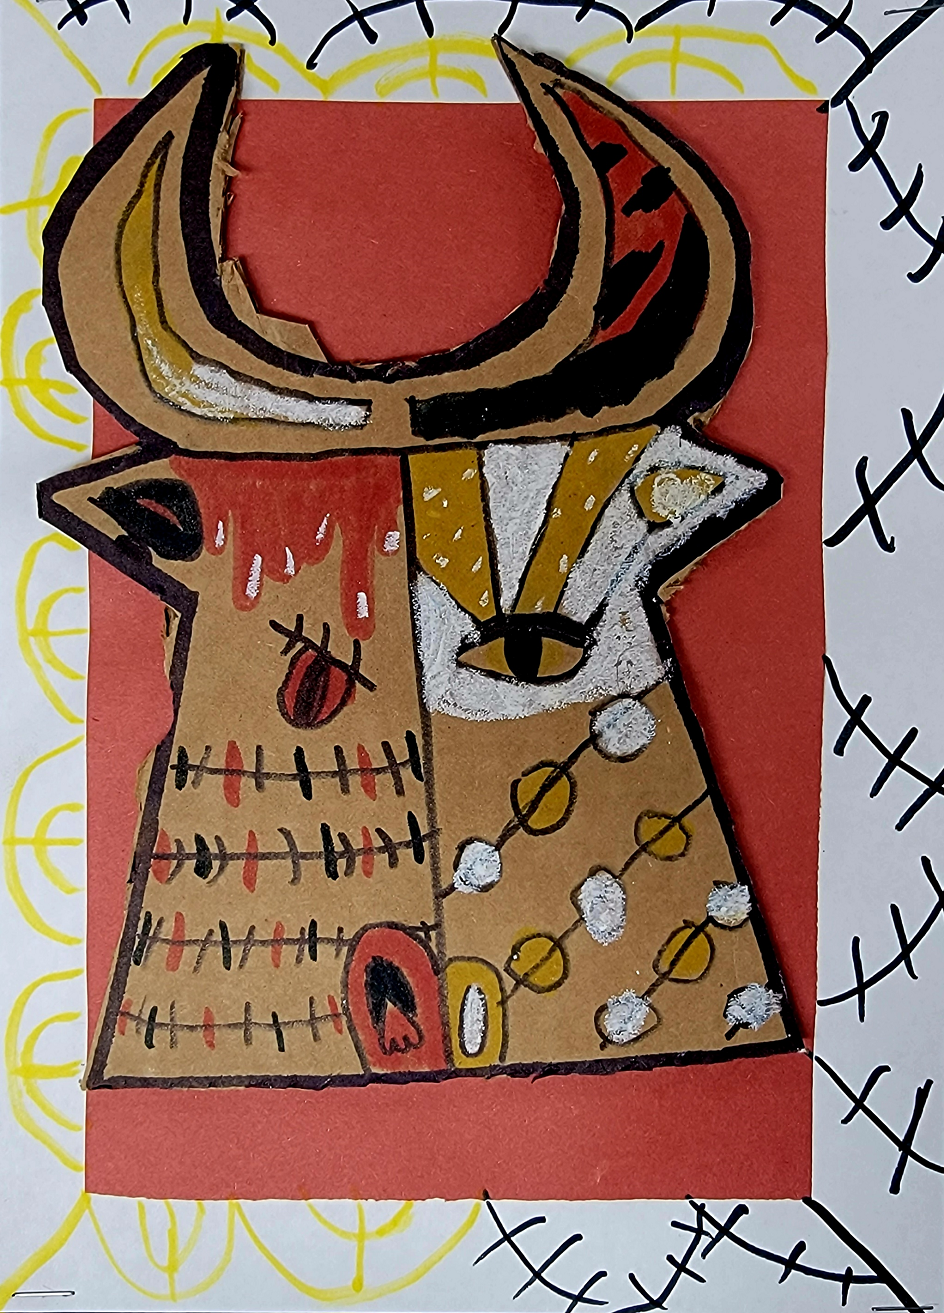 Cardboard Bulls inspired by Pablo Picasso